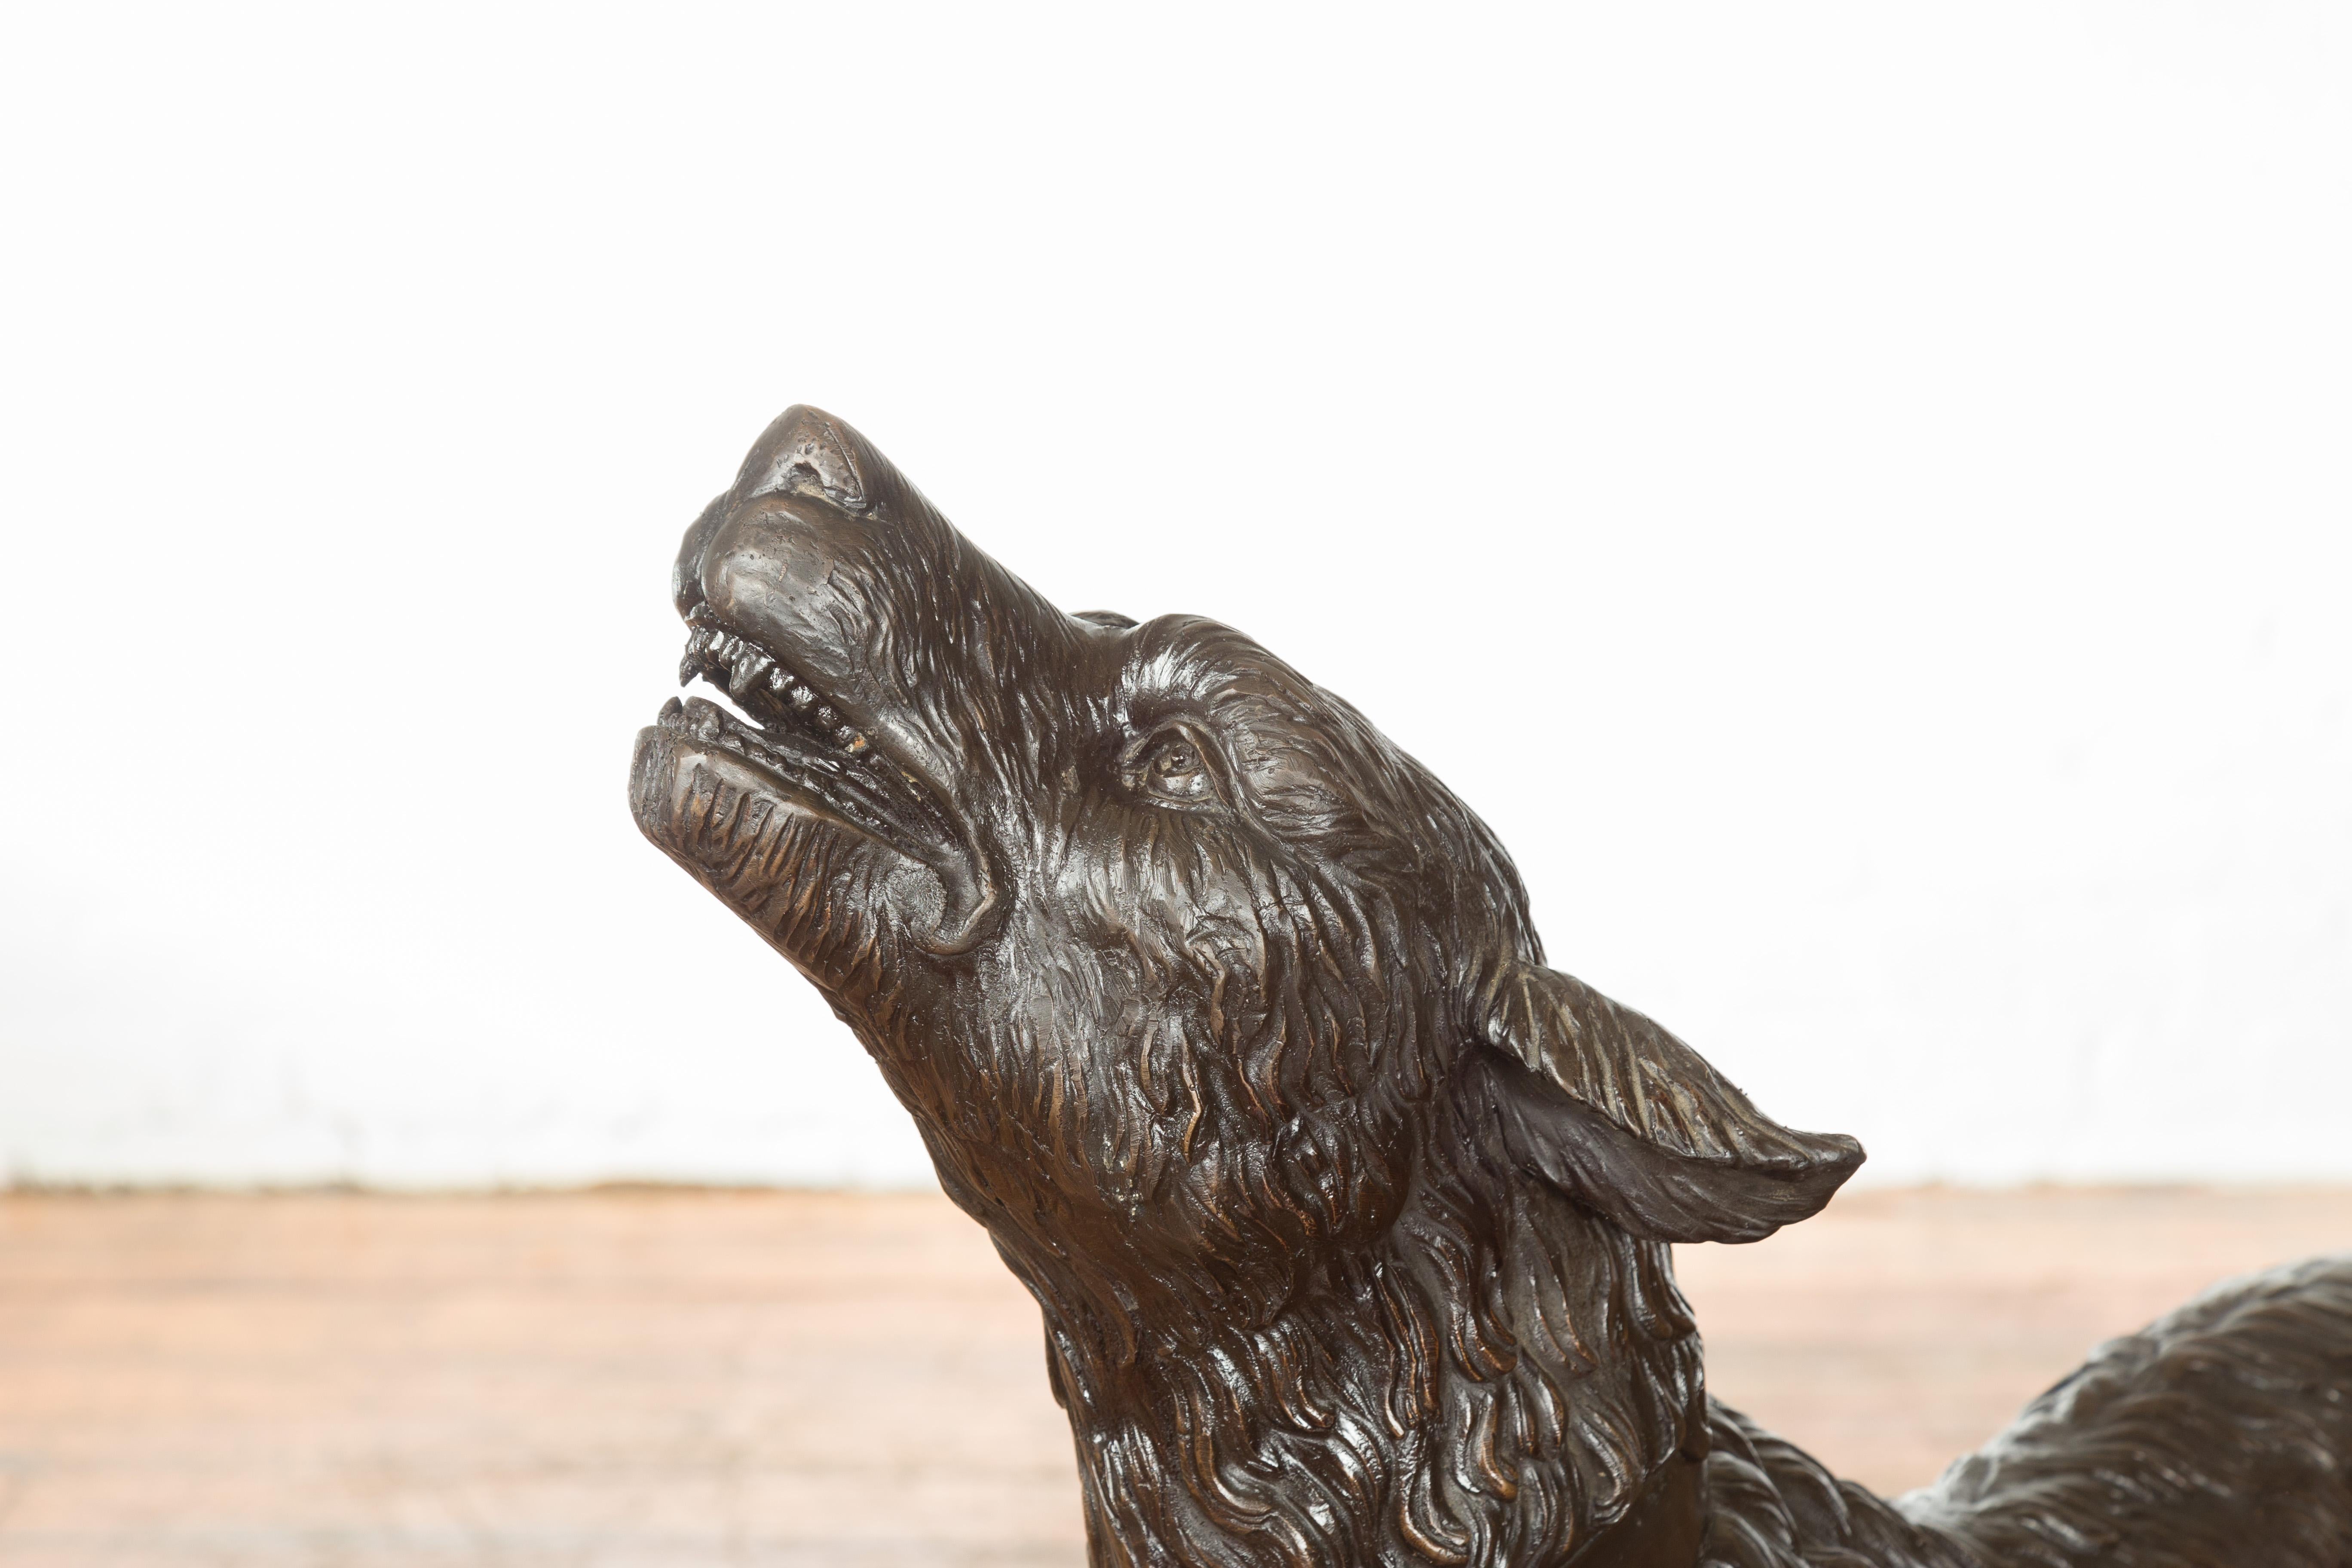 Vintage Lost Wax Cast Bronze Sculpture of a Howling Dog with Textured Patina 6